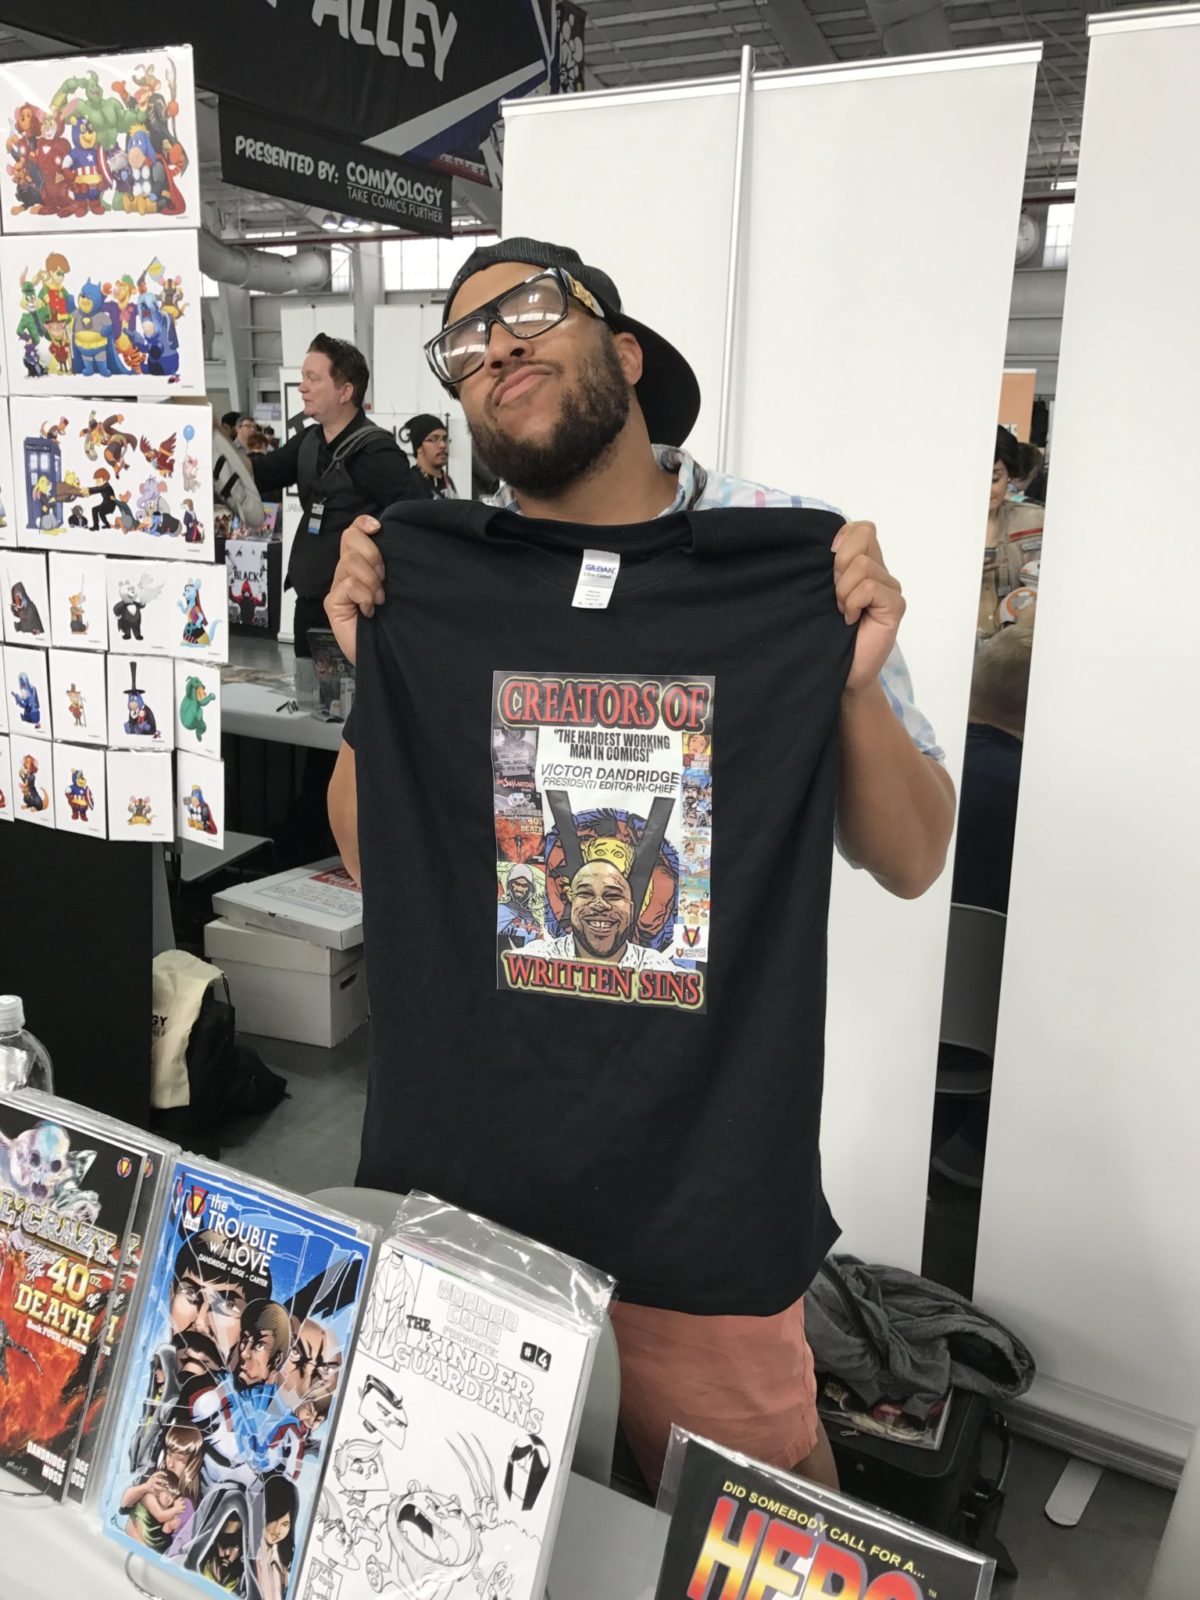 LIVE FROM NYCC VICTOR DANDRIDGE JR IS A King of Cons and he shows it at NYCC